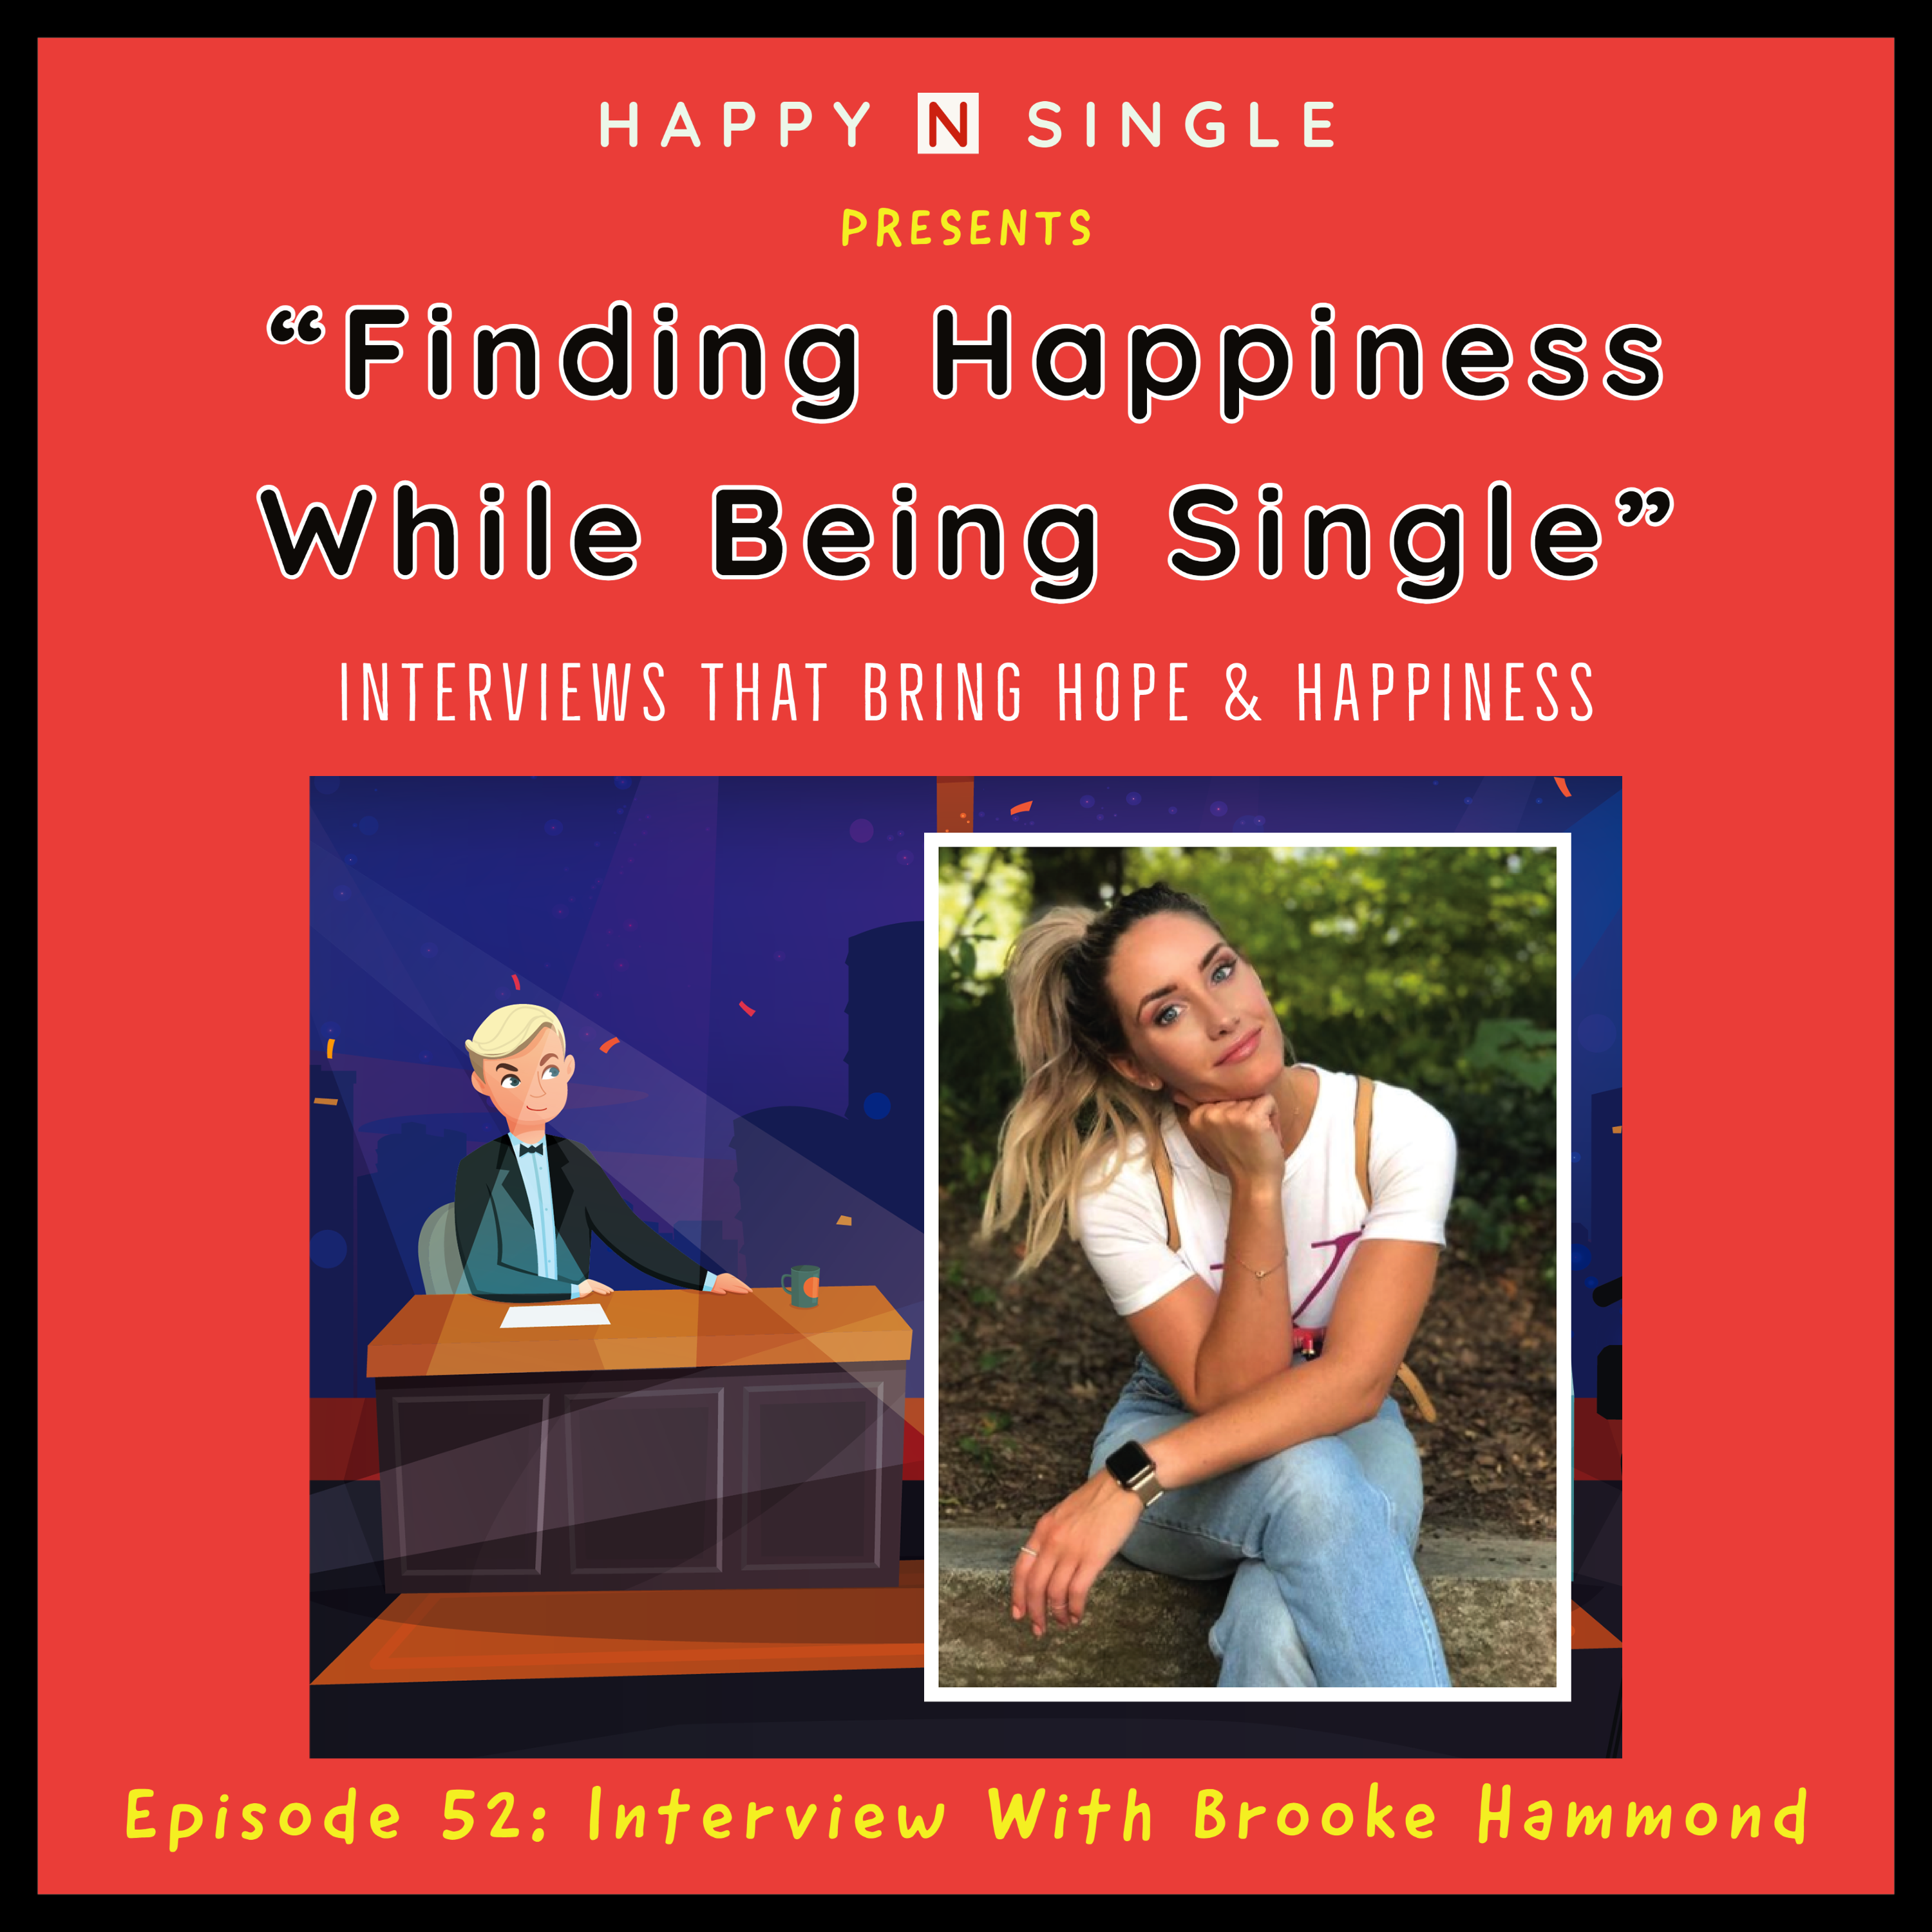 Interview With Brooke Hammond